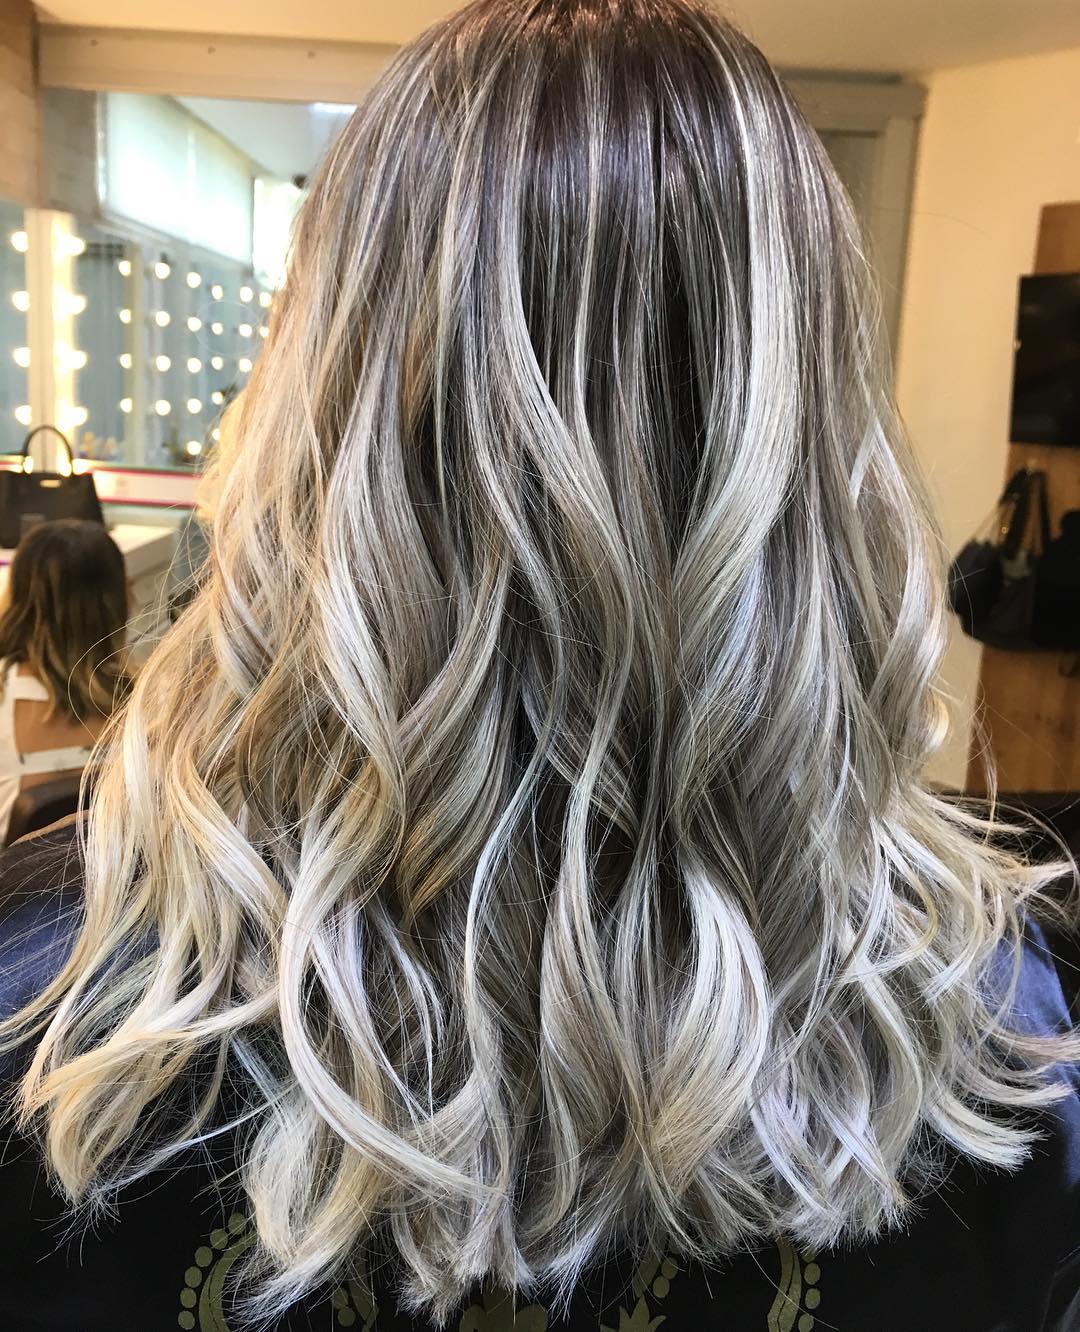 Bronde Hair With Ashy And White Highlights